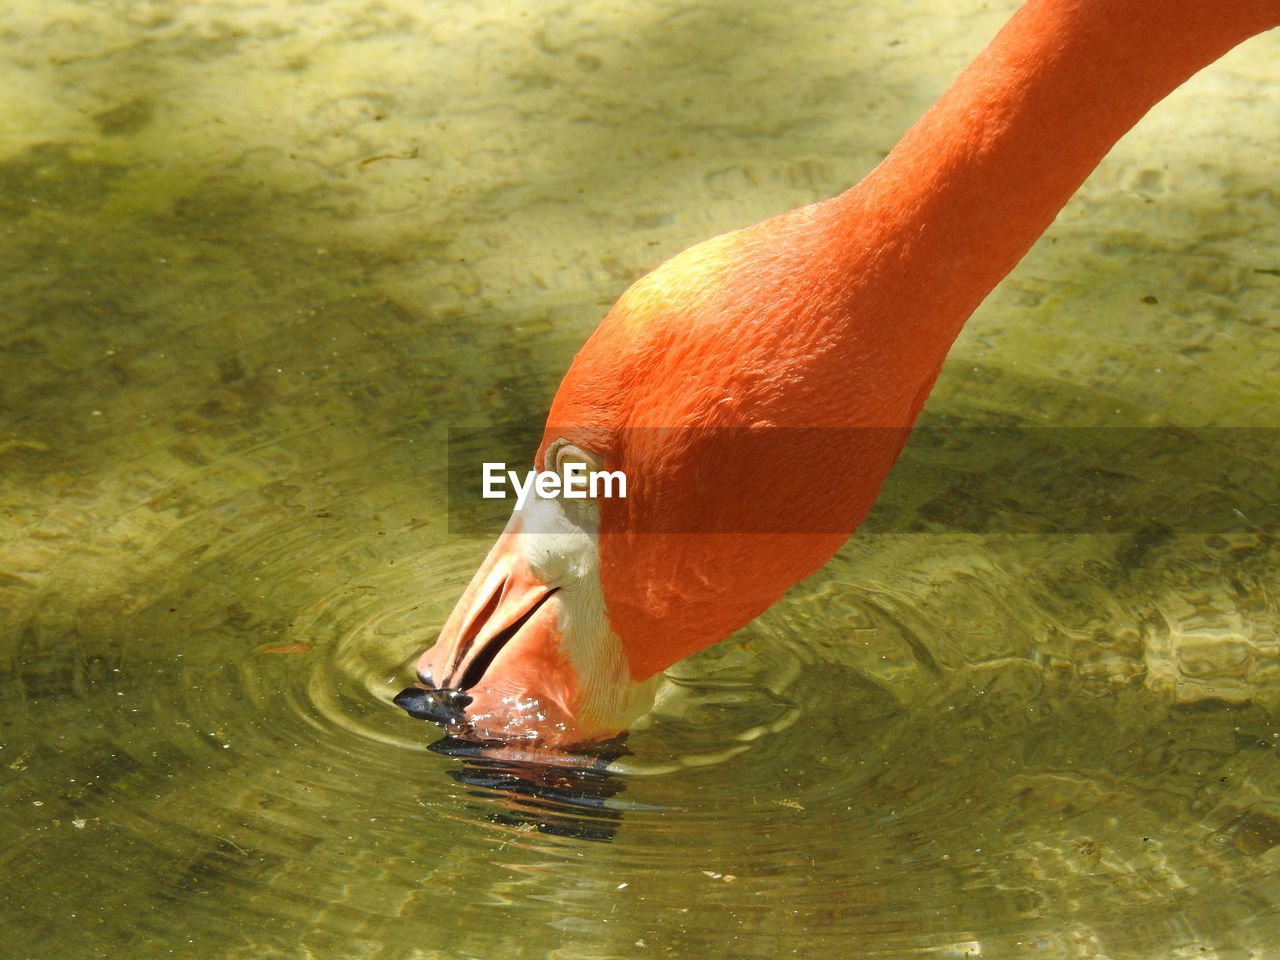 Flamingo drinking water in pond